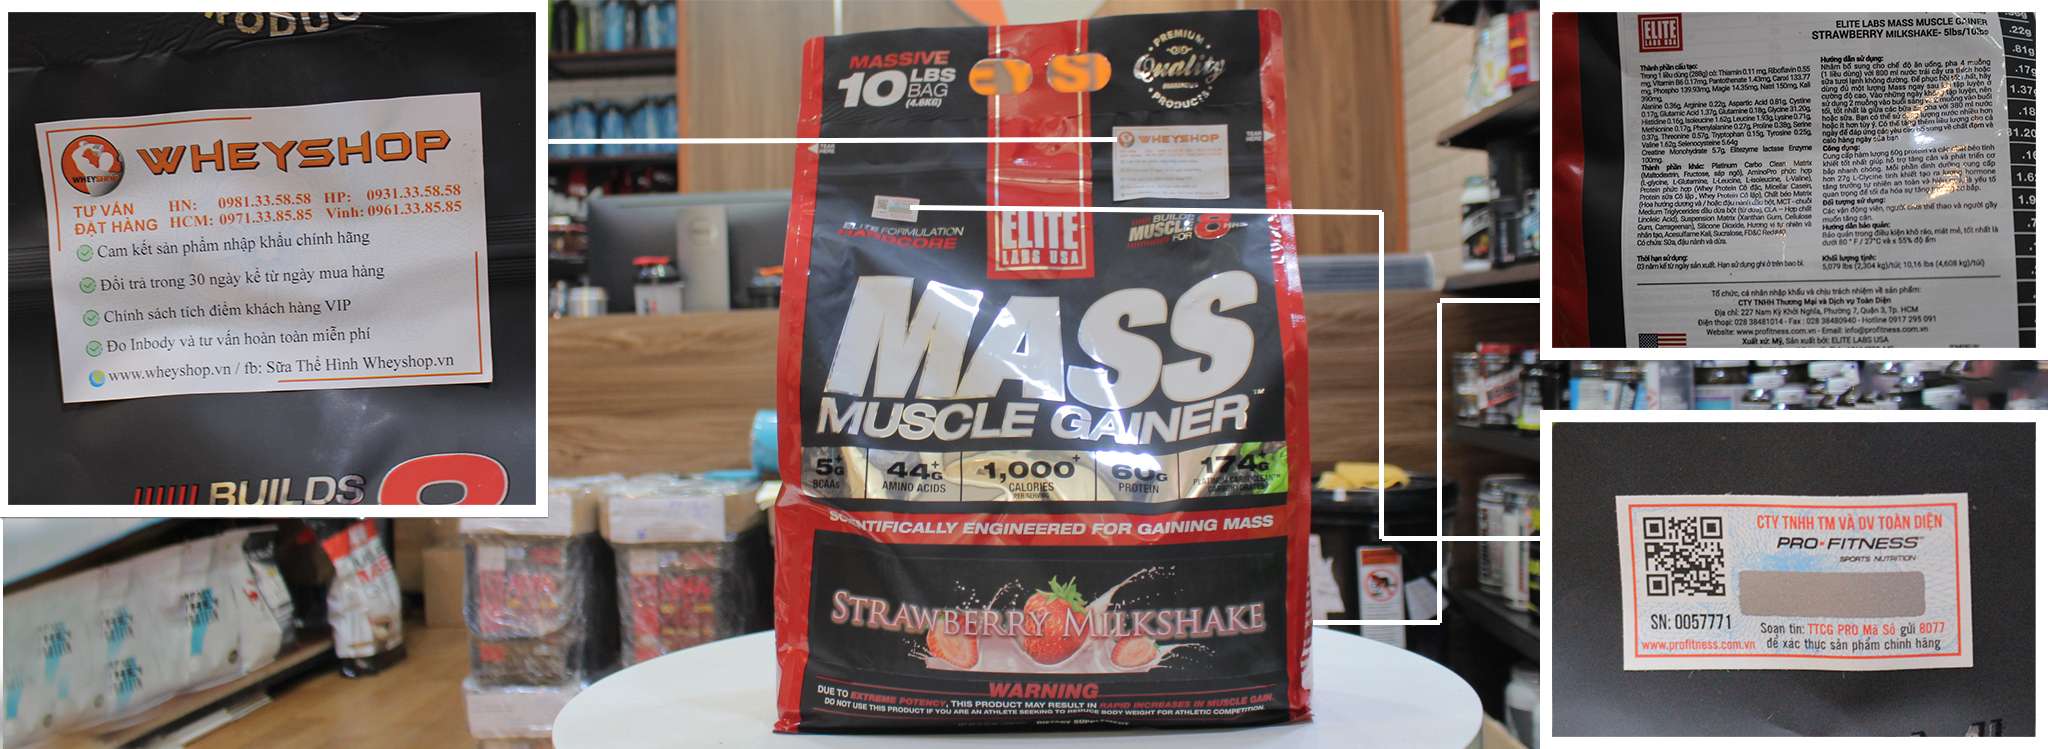 mass muscle gainer 10lbs gia re ha noi tphcm